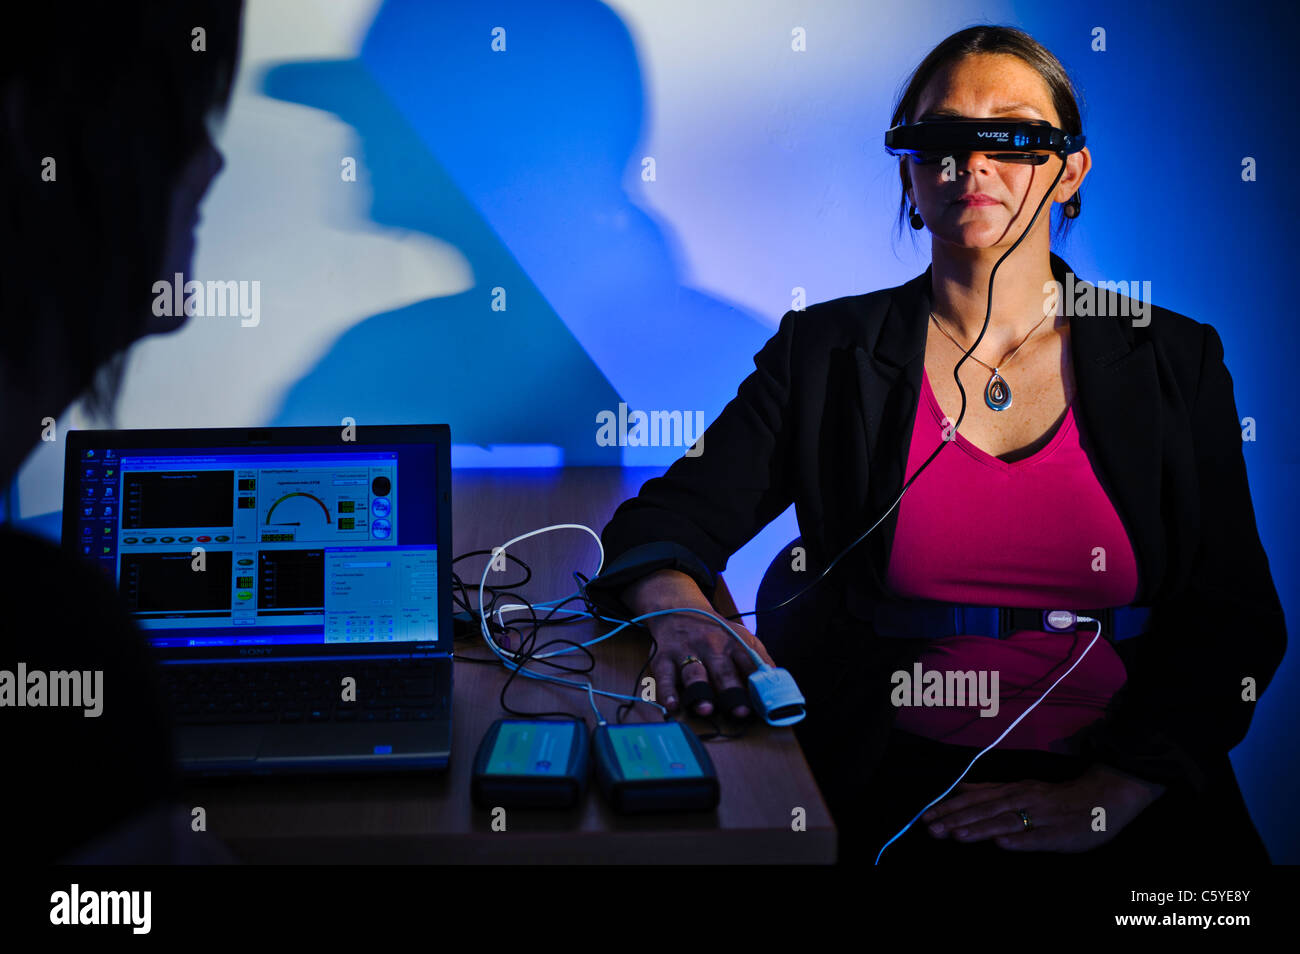 subject wearing virtual reality goggles in scientific study to treat phobia laptop showing results on screen in foreground blue Stock Photo